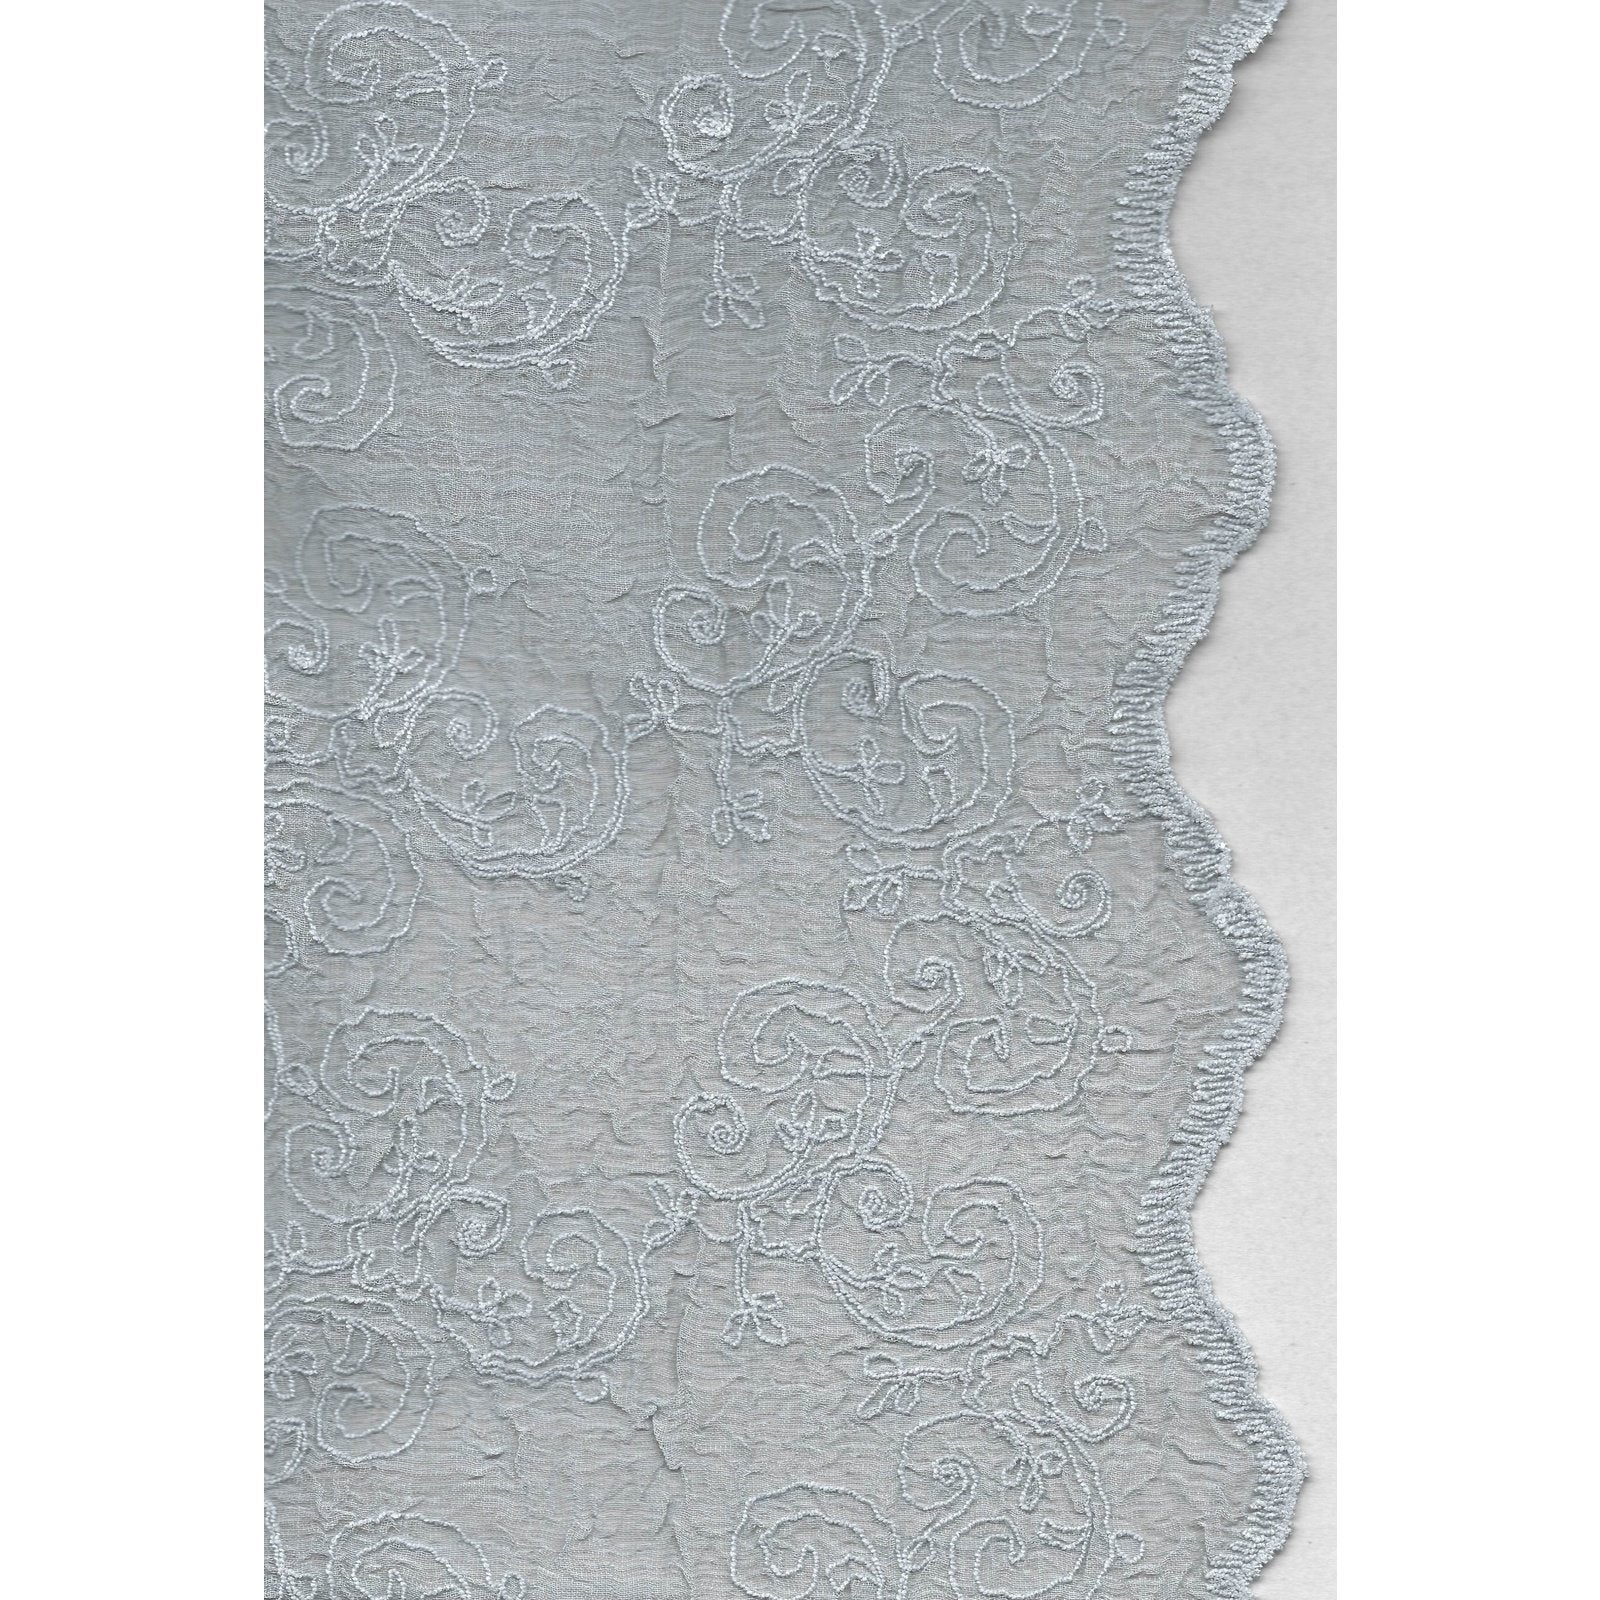 Hampton-blue-voile-curtain-with-soft-embroidery-creates-a-romantic-bedroom-ambiance.